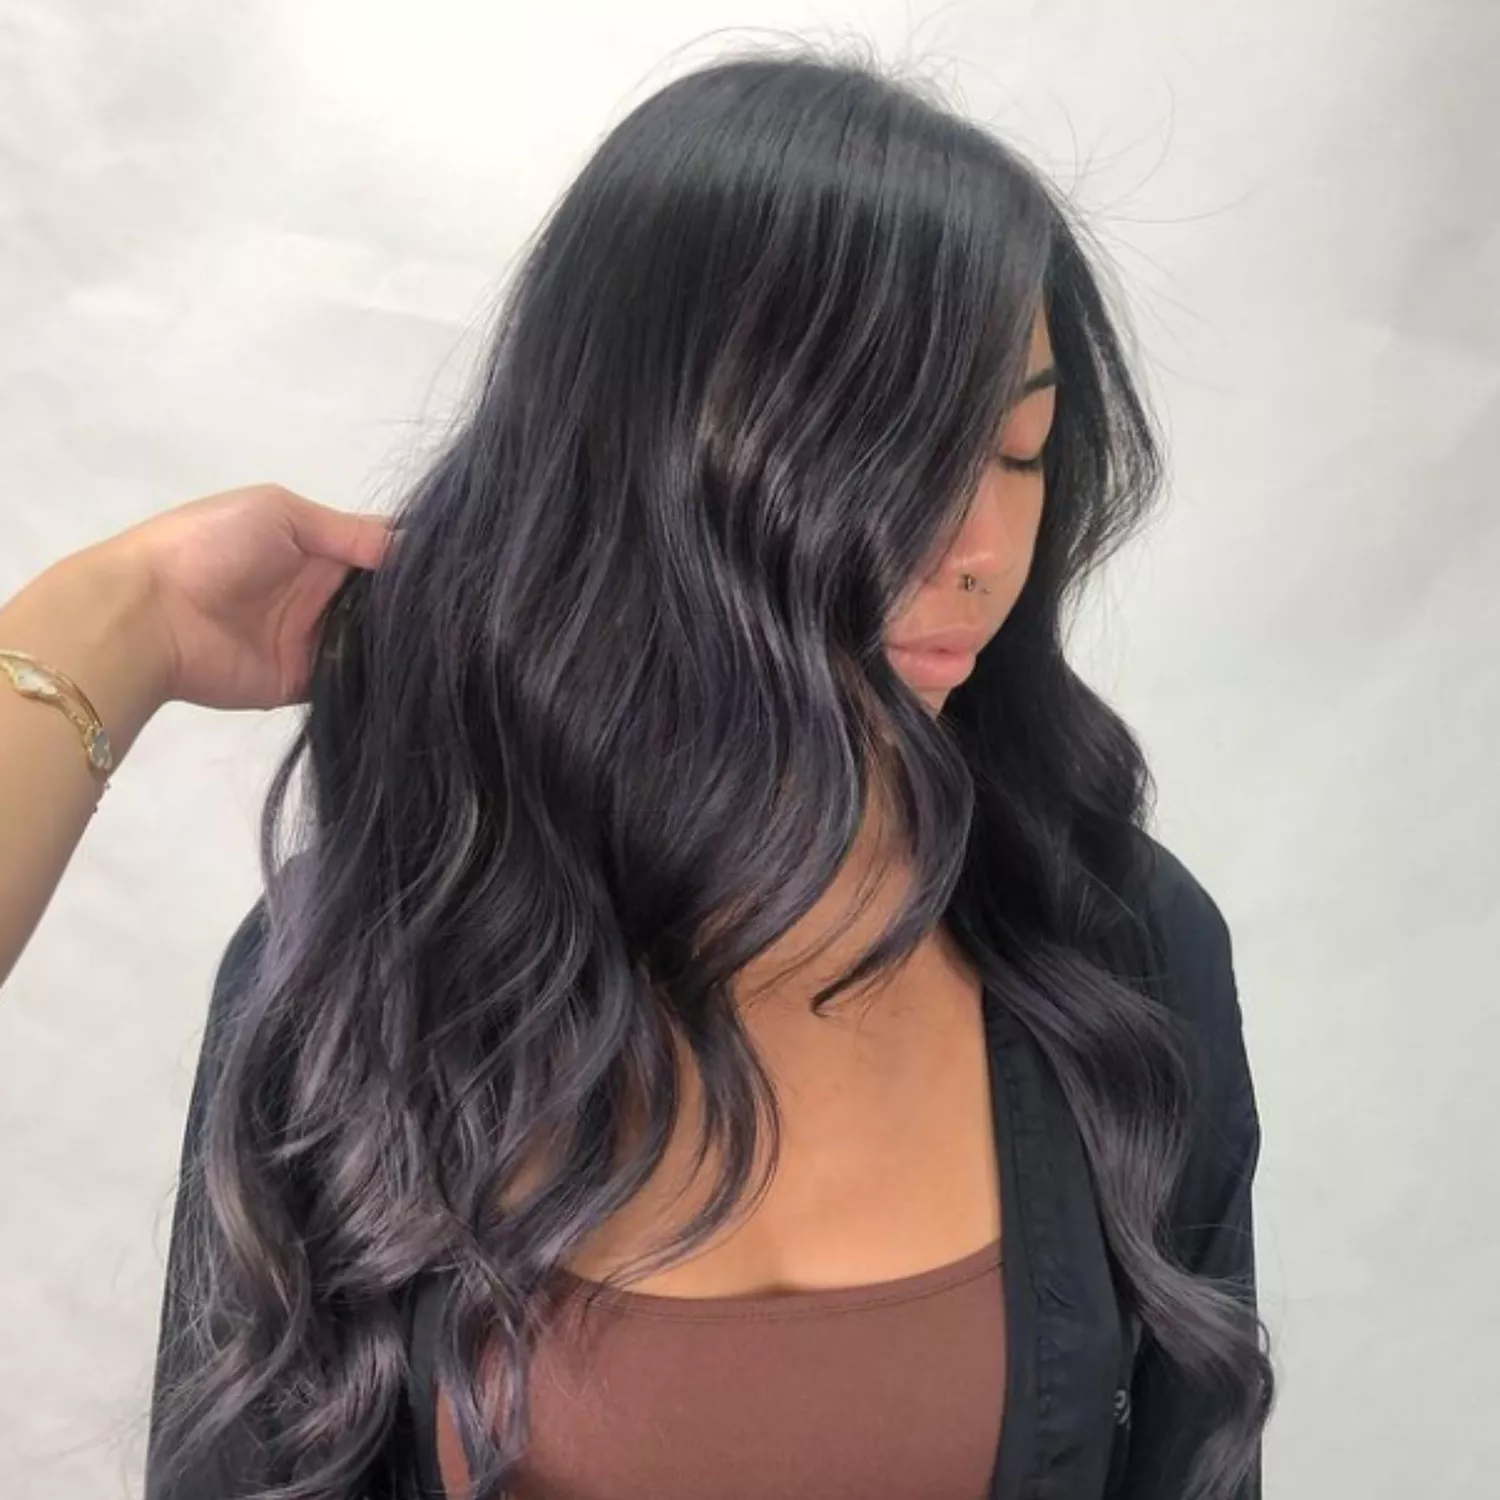 Blue-black Hair Color Ideas: Icy Blue hairstyles